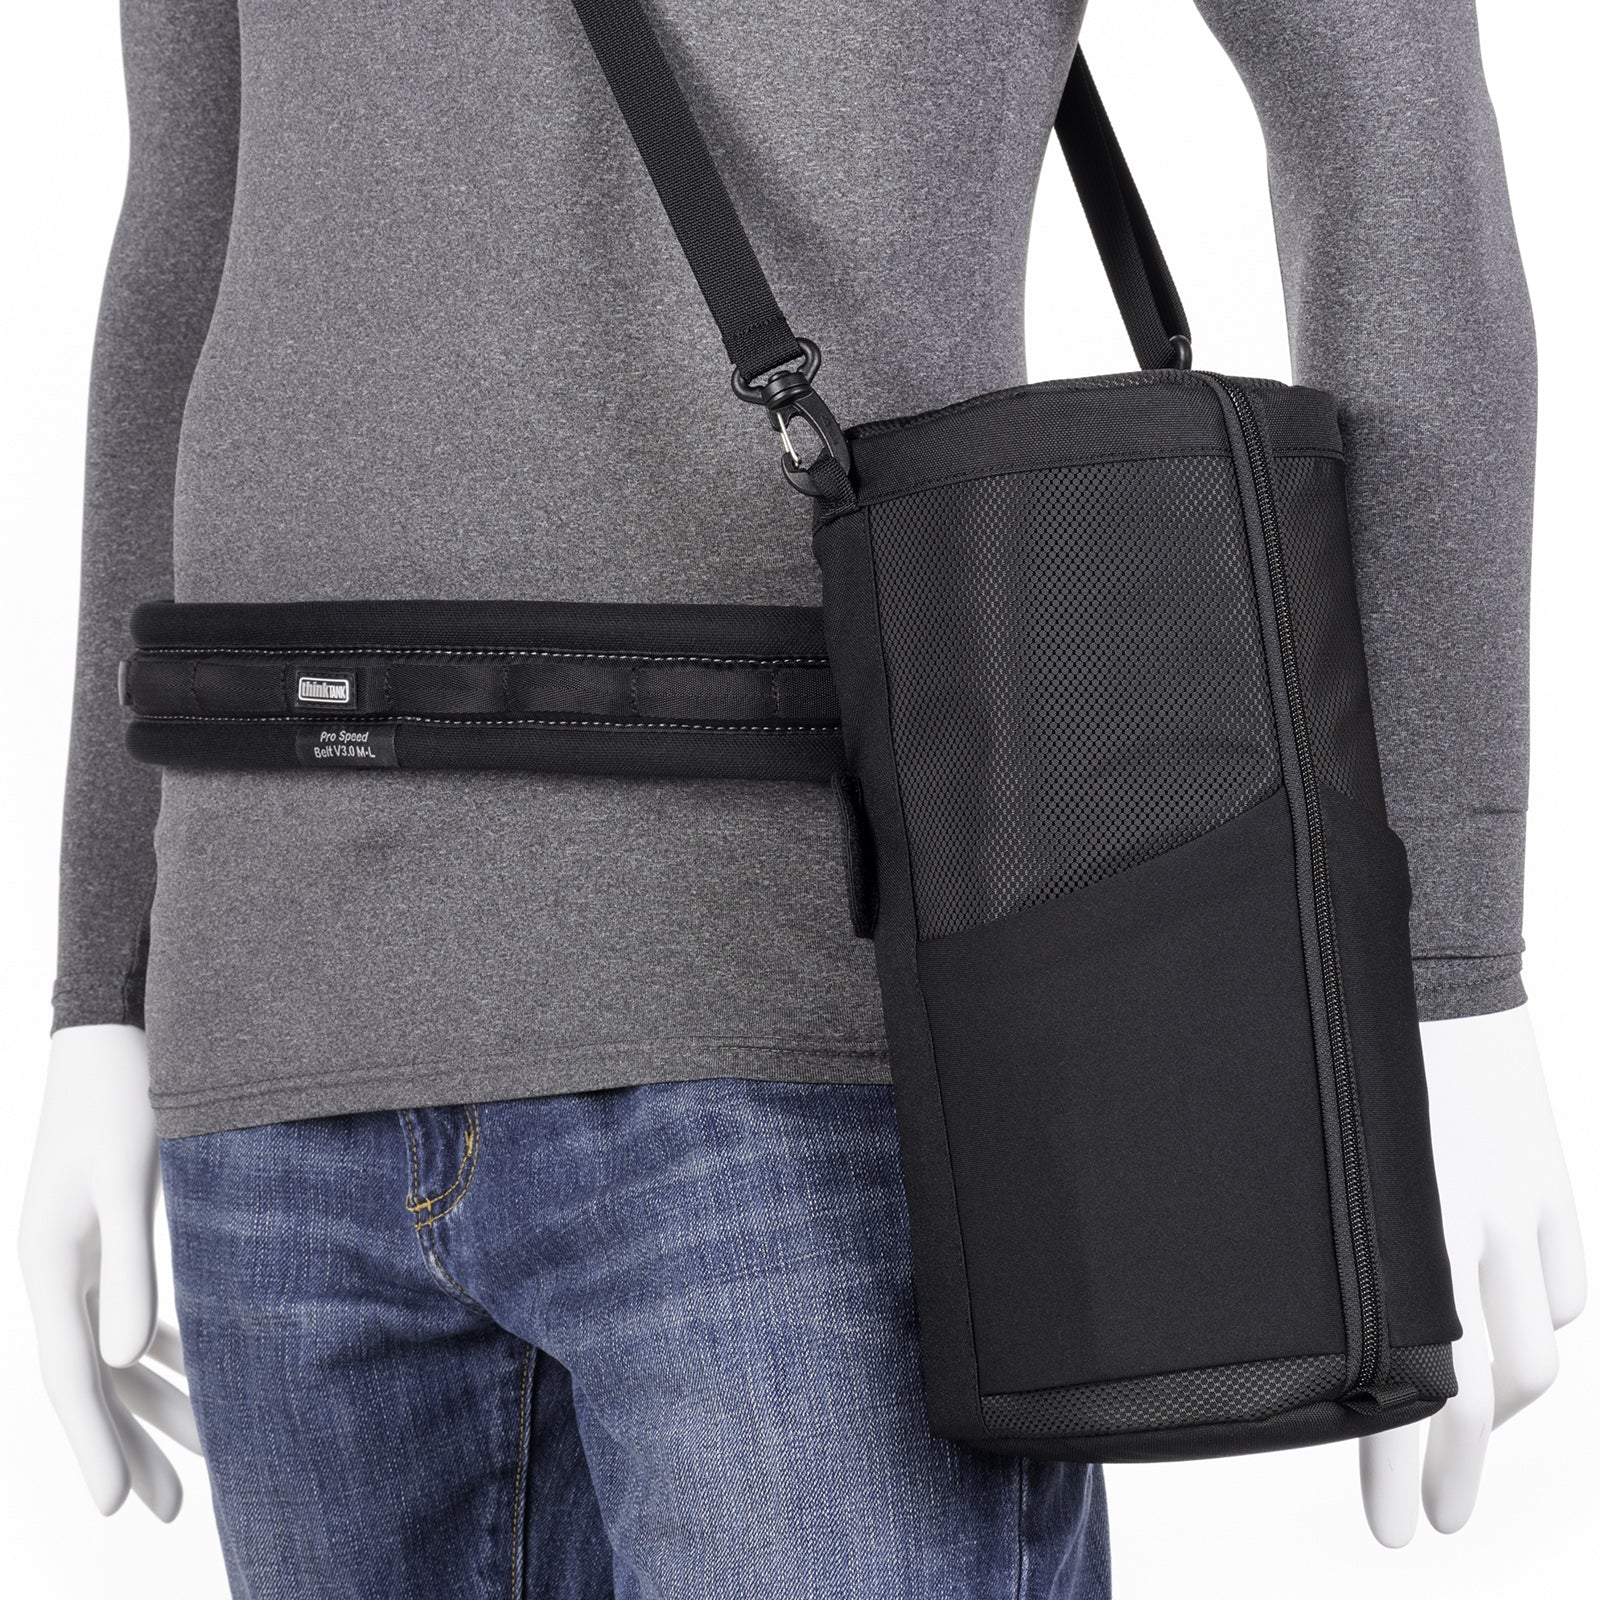 Pouch rotates or locks on a belt. Shoulder Strap included.